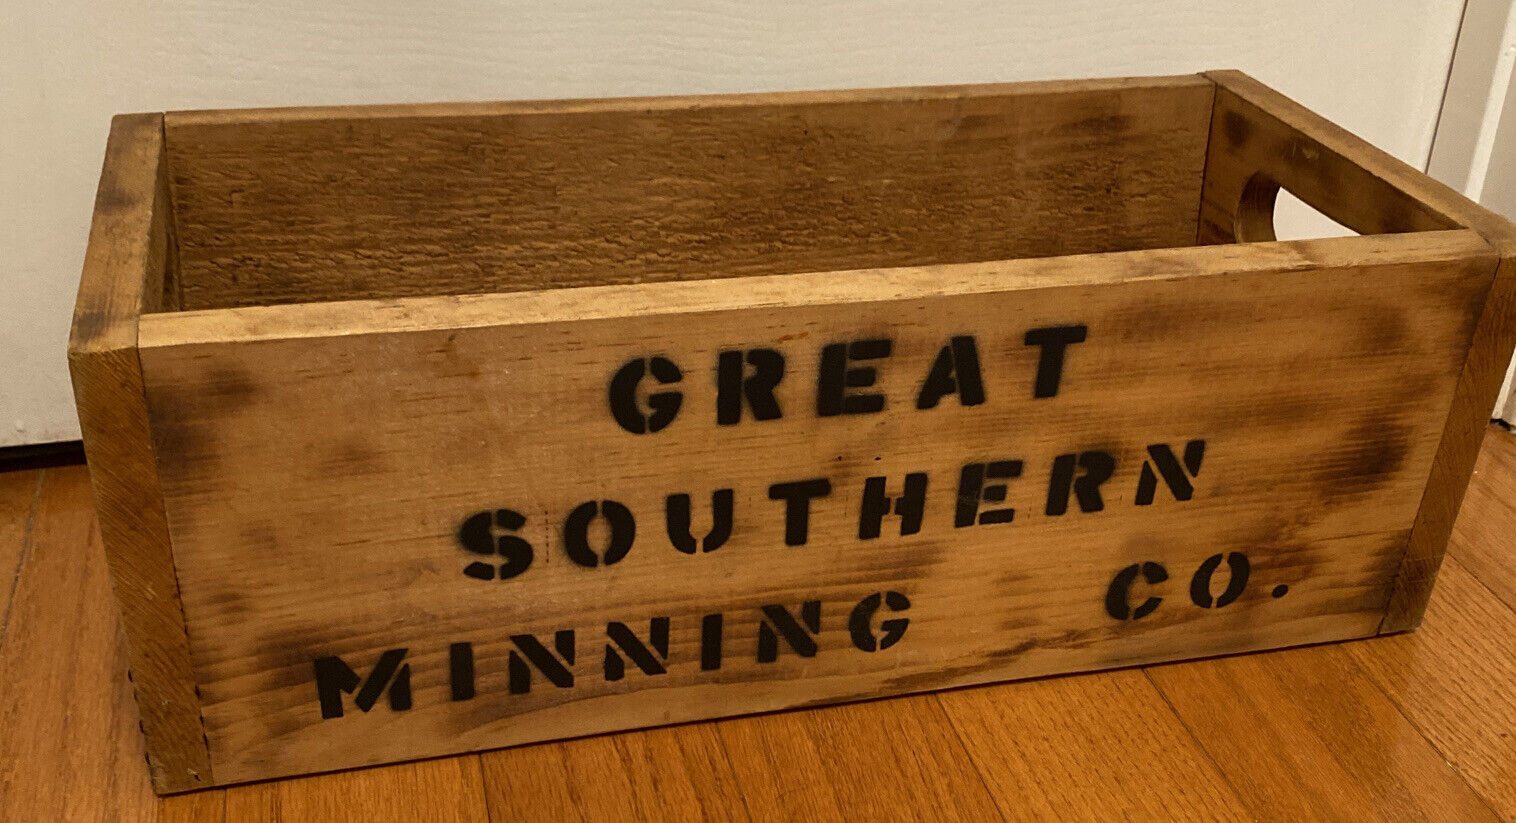 Vintage Great Southern Mining Co. Sifter Box Crate Rare